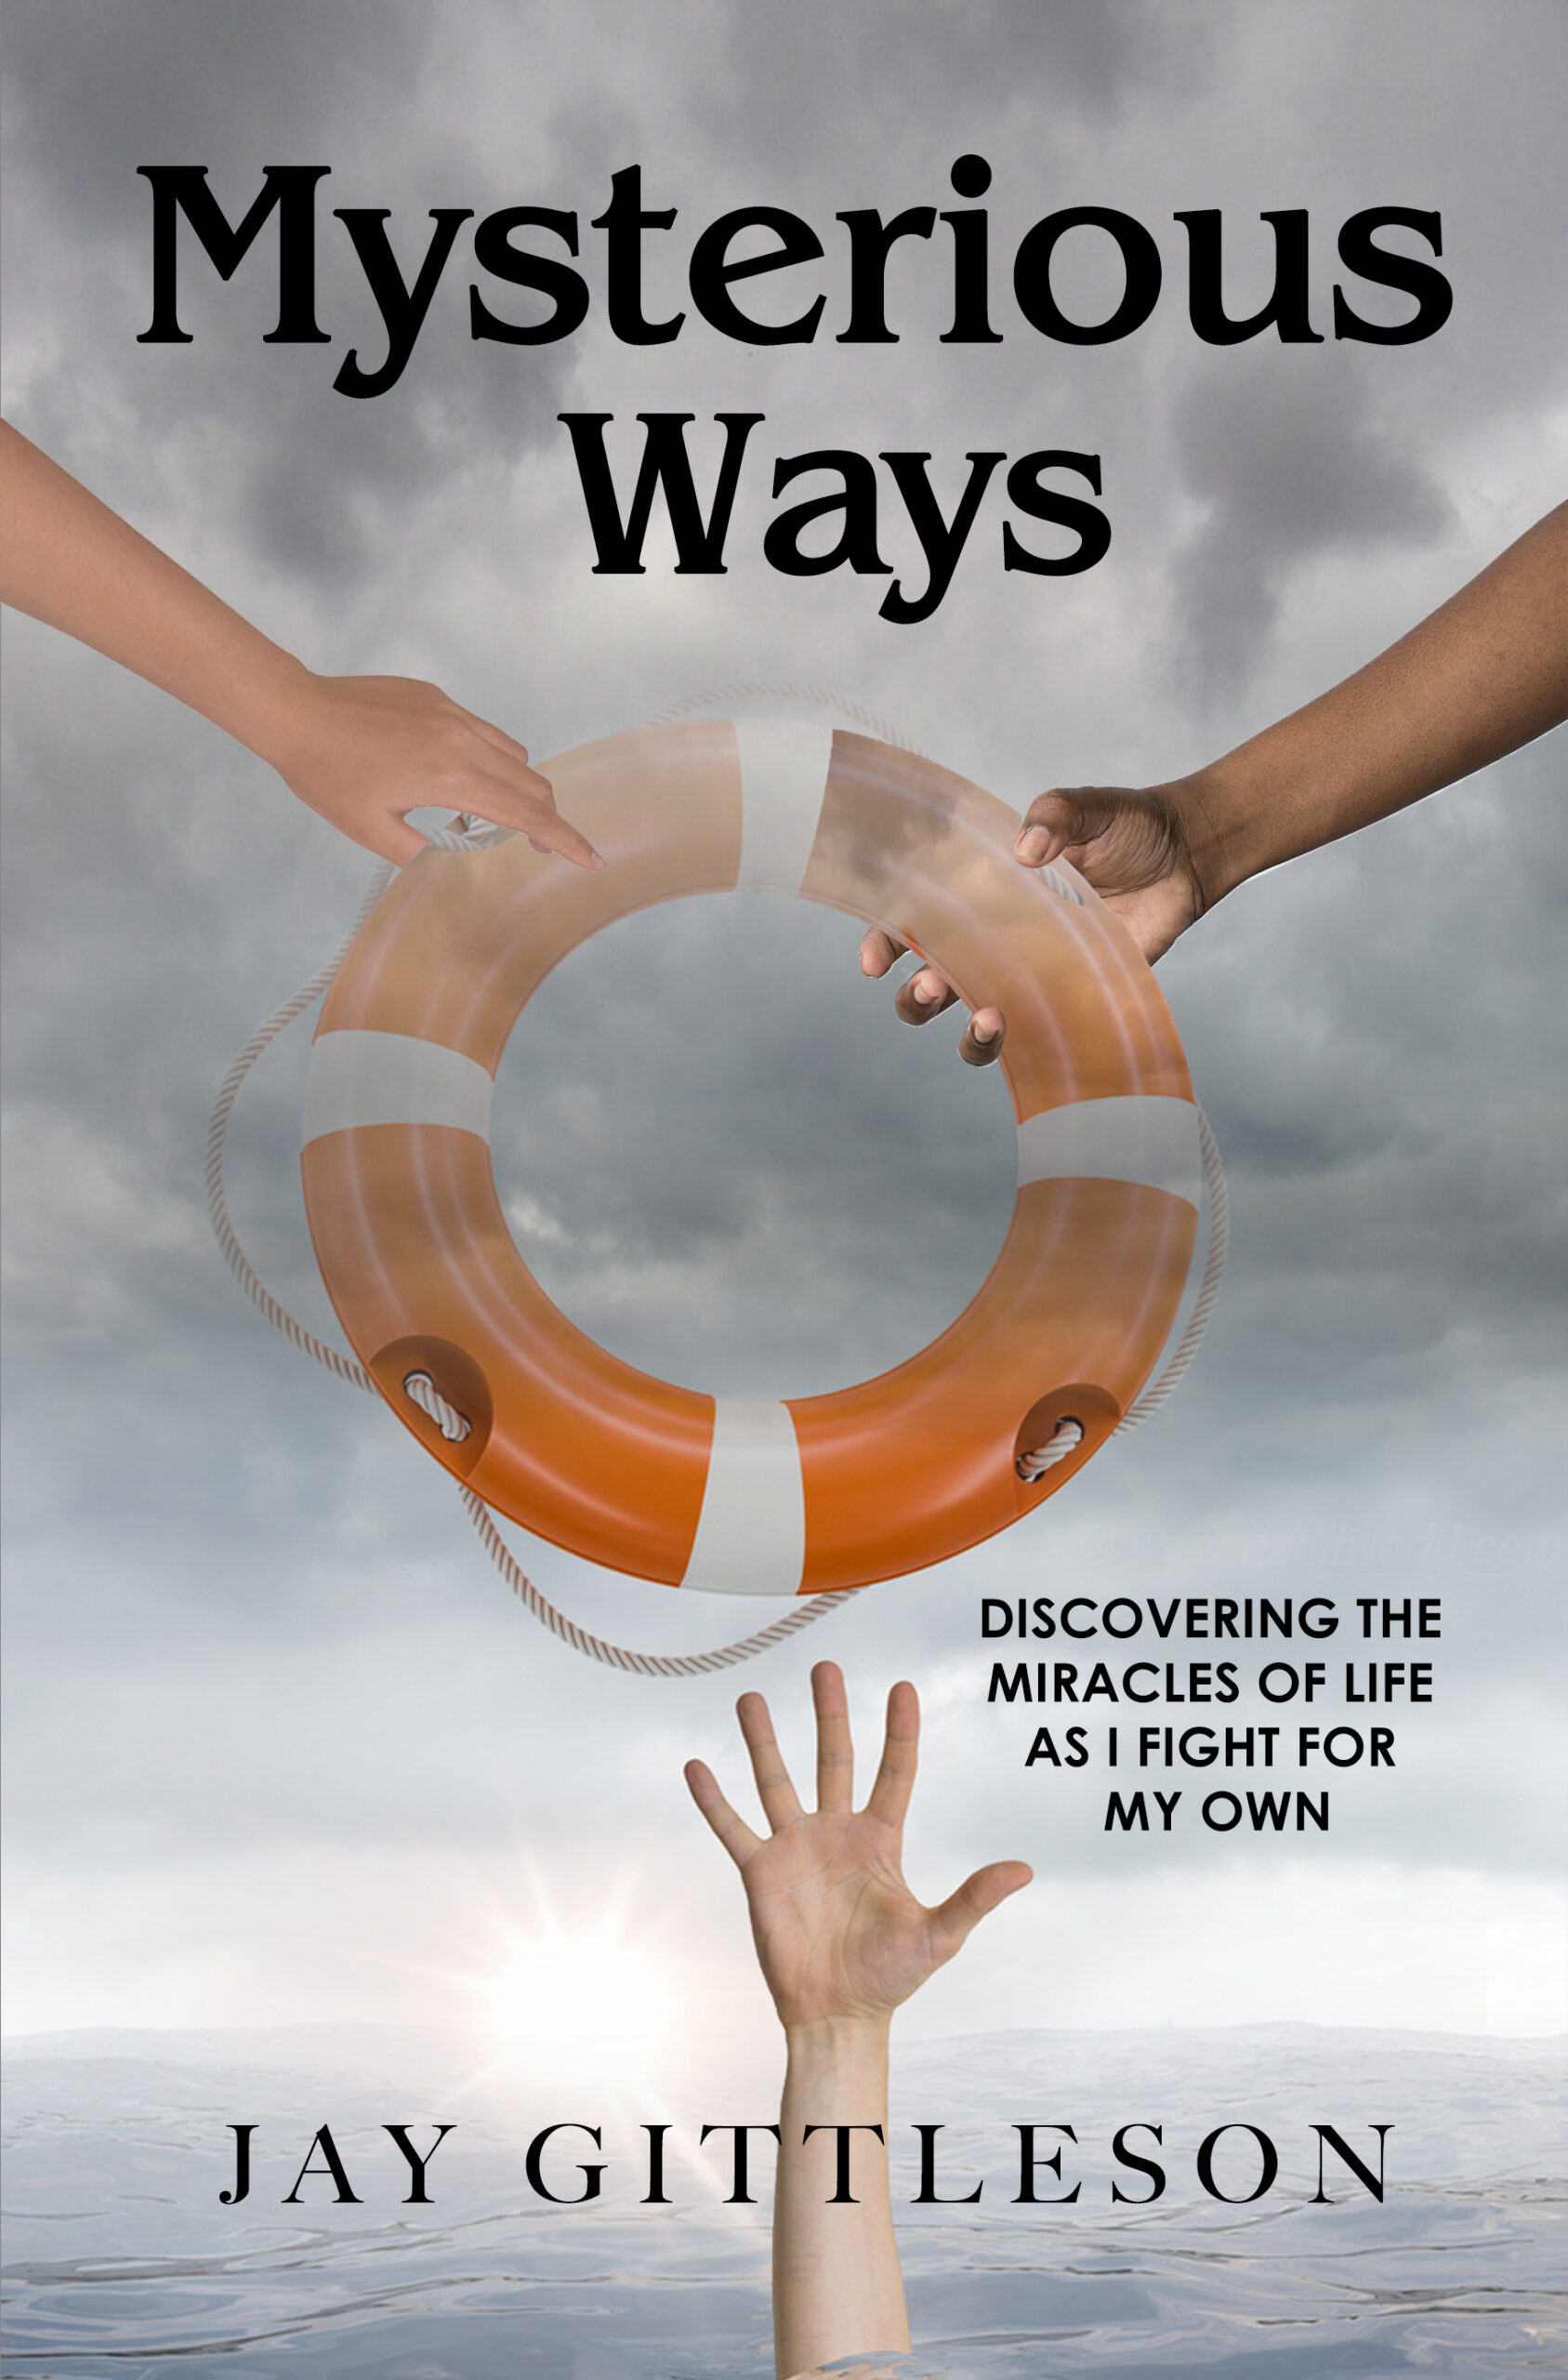 FREE: Mysterious Ways: Discovering the Miracles of Life as I Figh for My Own by Jay Gittleson